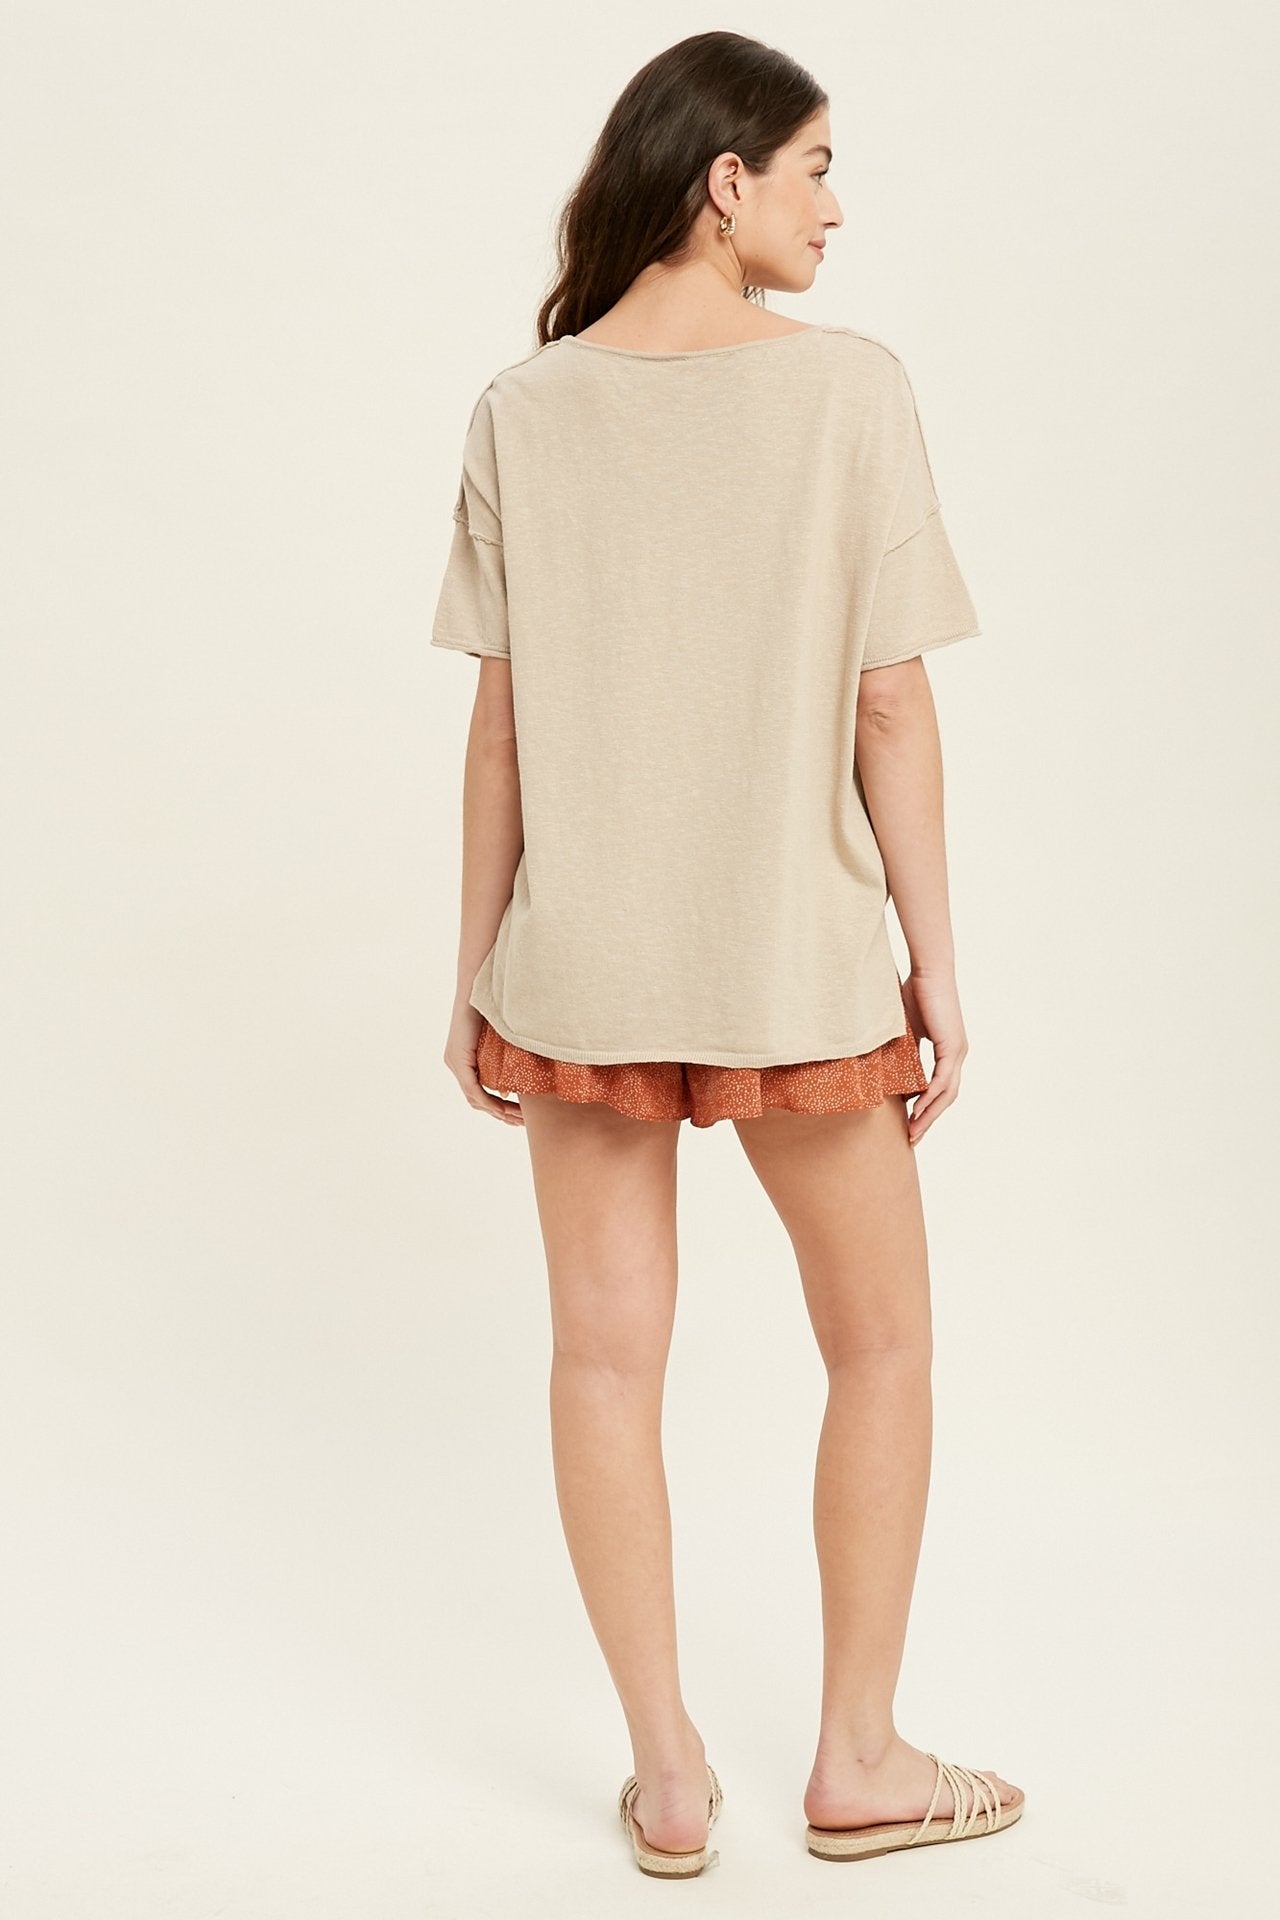 Oversized drop shoulder slub knit top with side slit detail  Ivy and Pearl Boutique   